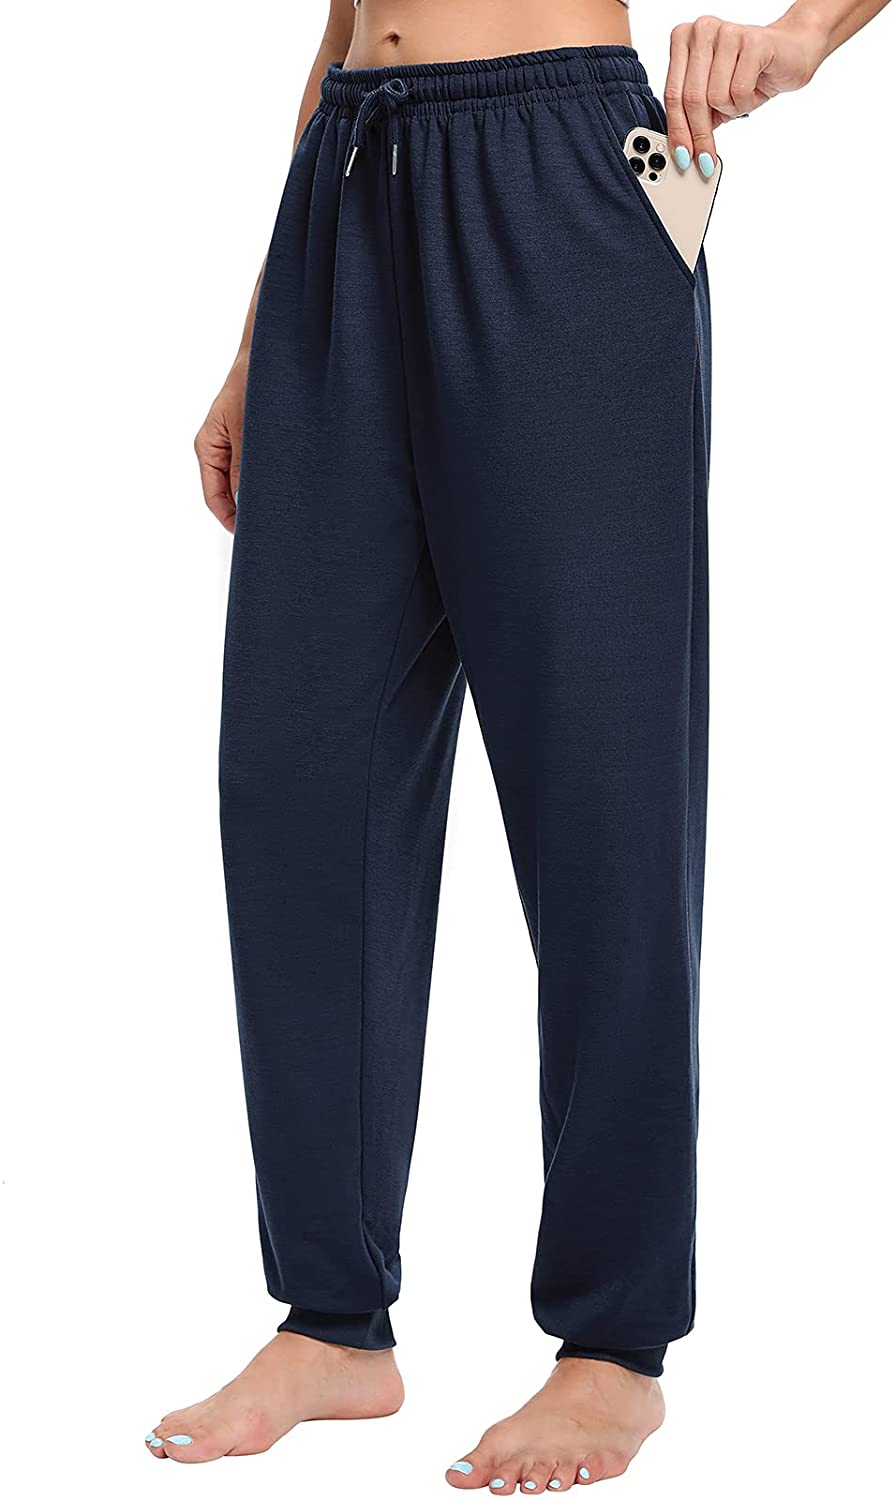 Hisir Homme Womens Yoga Sweatpants Comfy Lounge Jogger Pants Drawstring Loose Elastic Waisted Casual Pants with Pockets